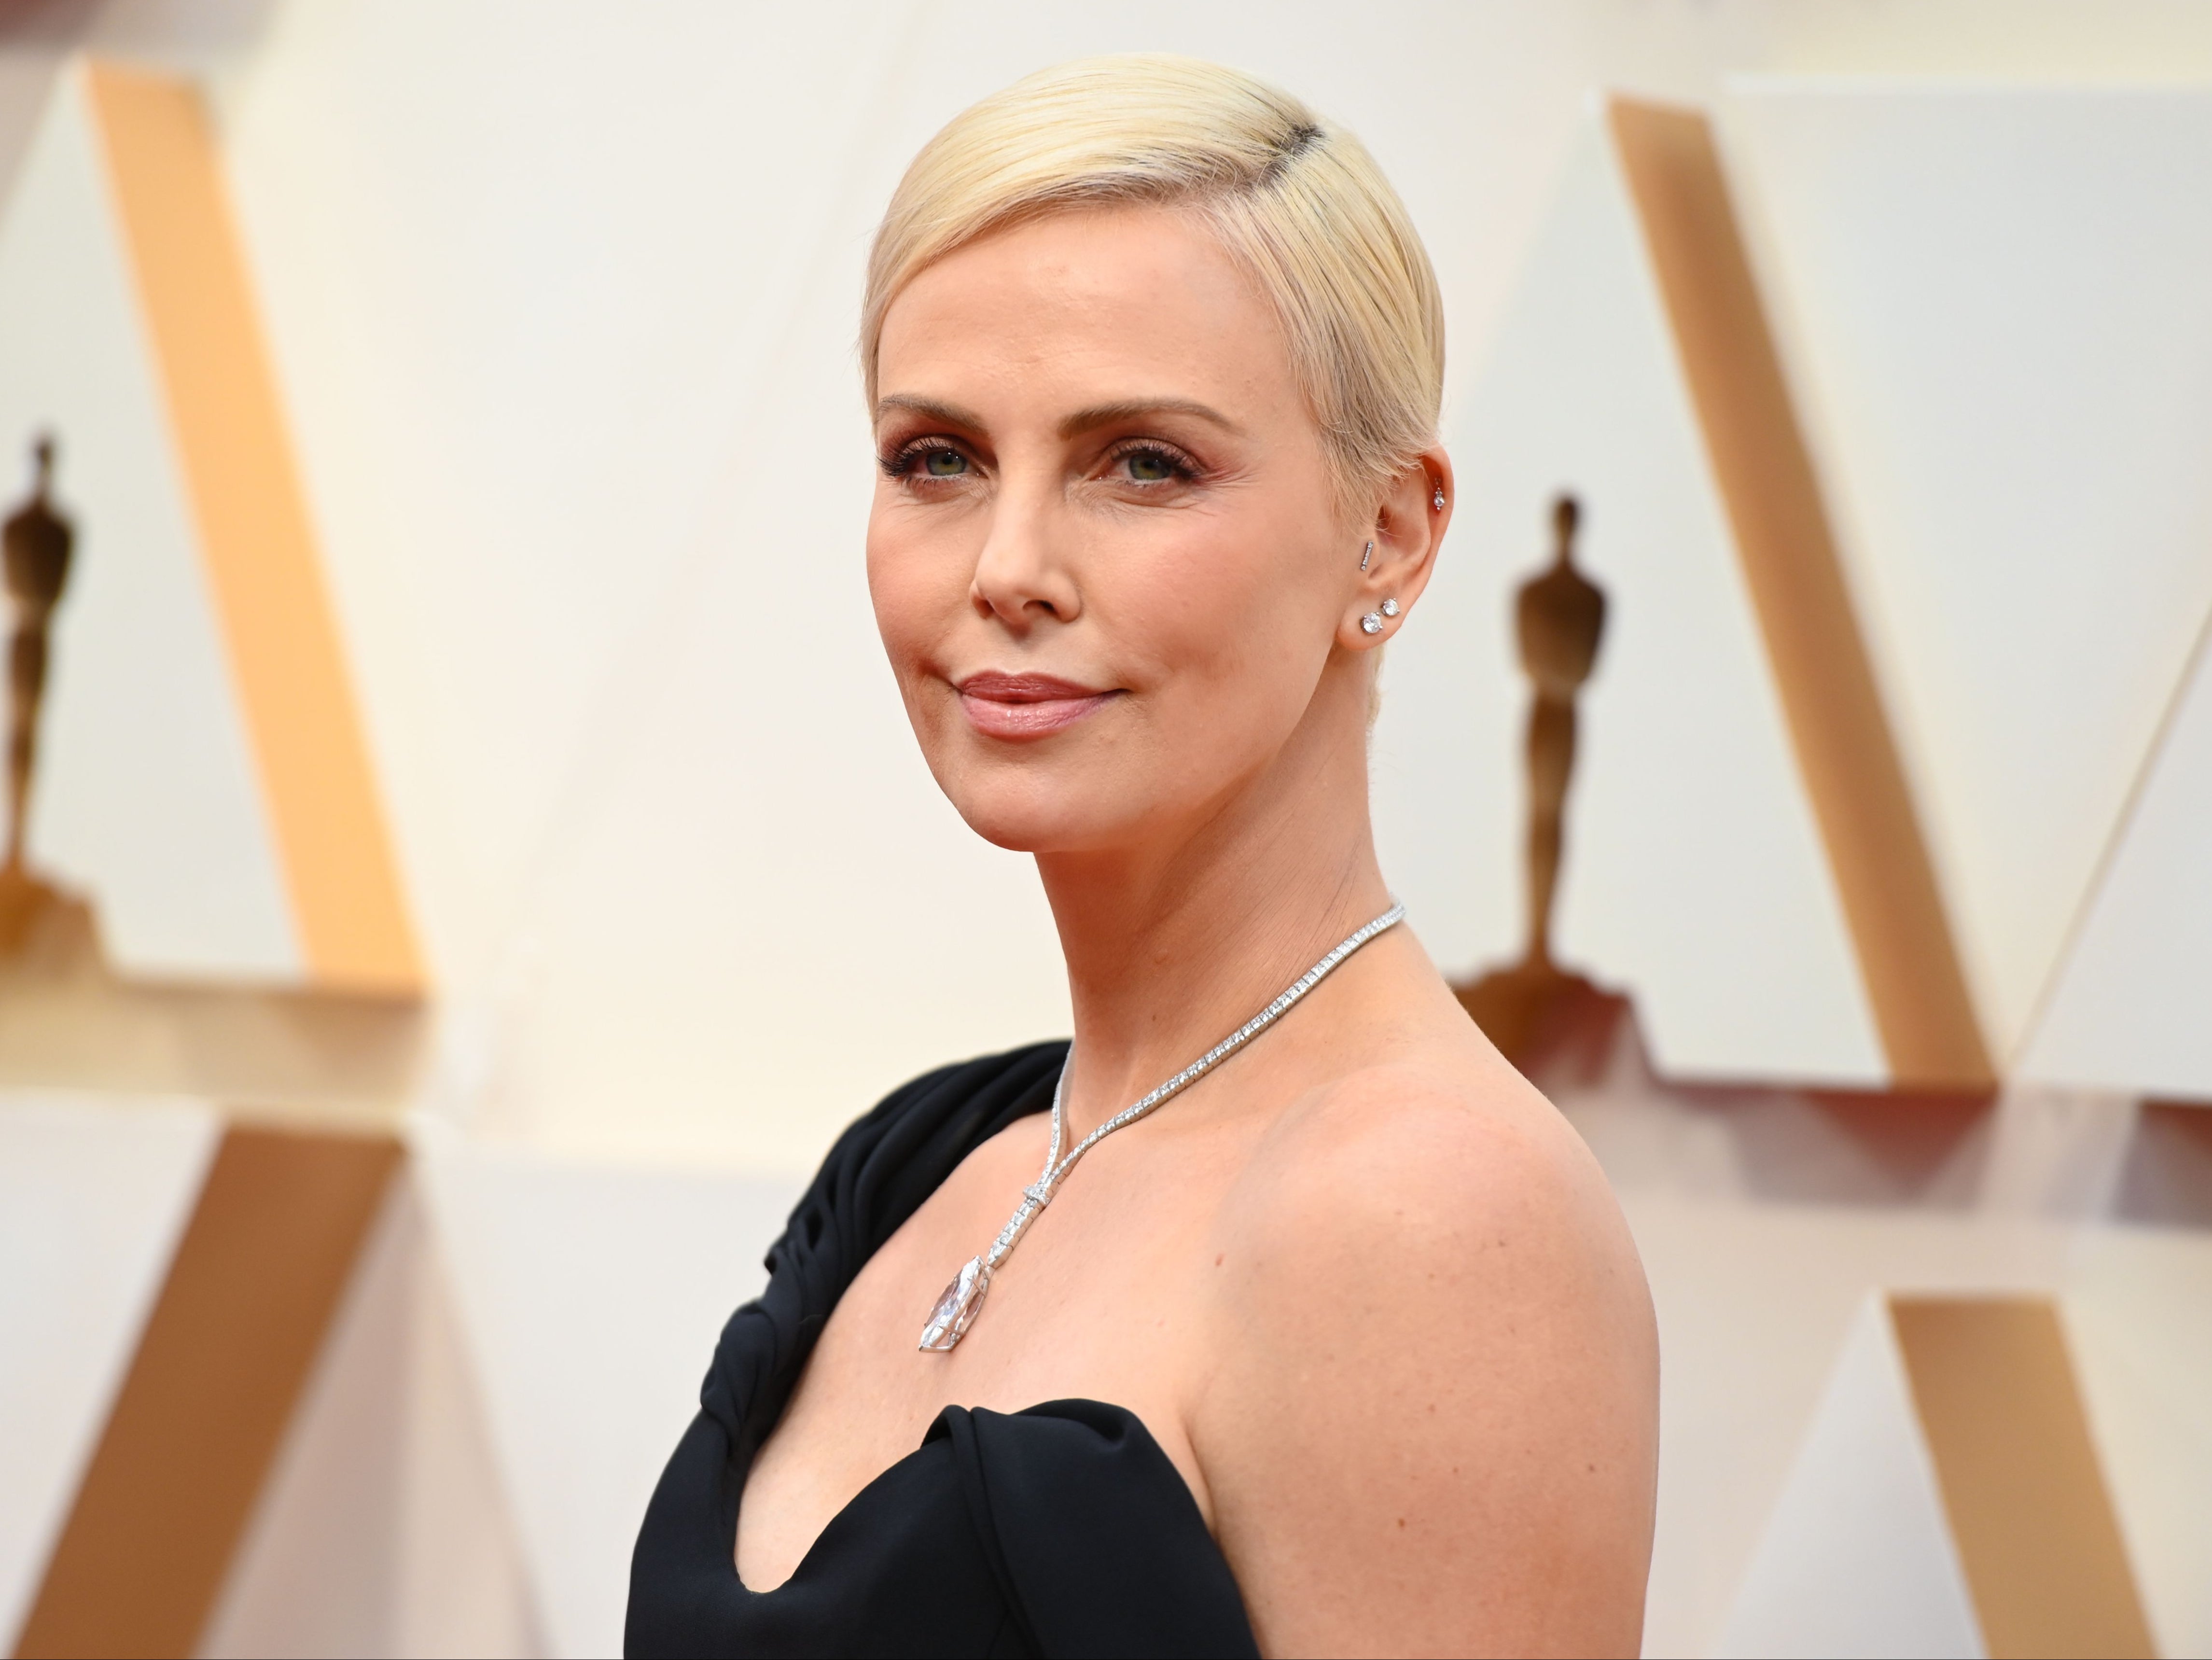 Charlize Theron arrives for the 92nd Oscars at the Dolby Theatre in Hollywood, California on 9 February 2020